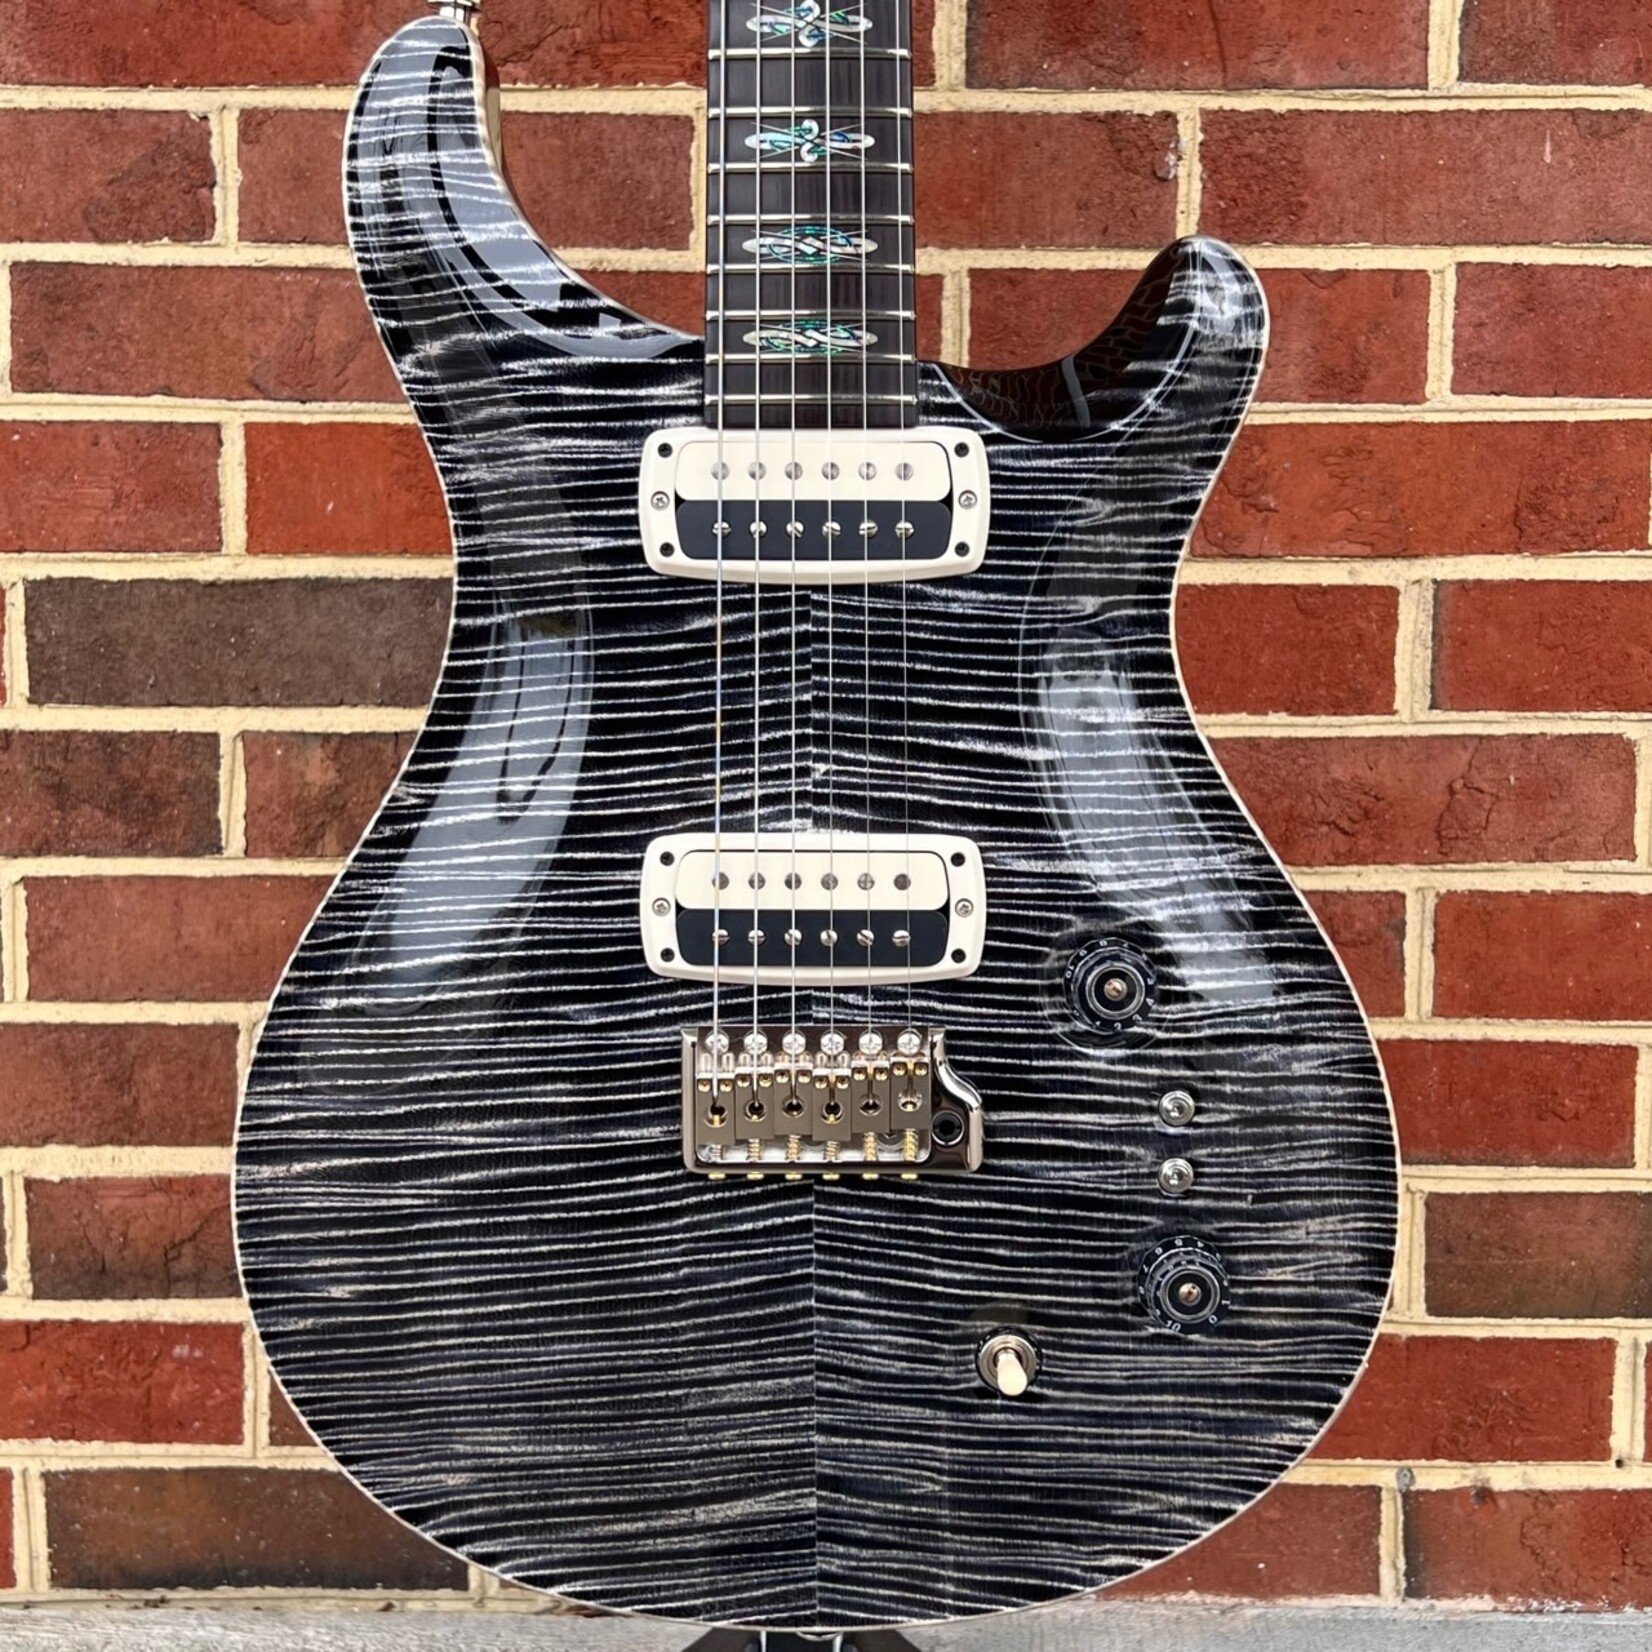 Paul Reed Smith Paul Reed Smith Private Stock John McLaughlin Limited Edition, 1 of 200 Worldwide, Flame Maple Top, African Mahogany Body, Hormigo Neck, African Blackwood Fretboard, Celtic Knot Inlays - Crushed Opal, Signed by John McLaughlin, Hardshell Case